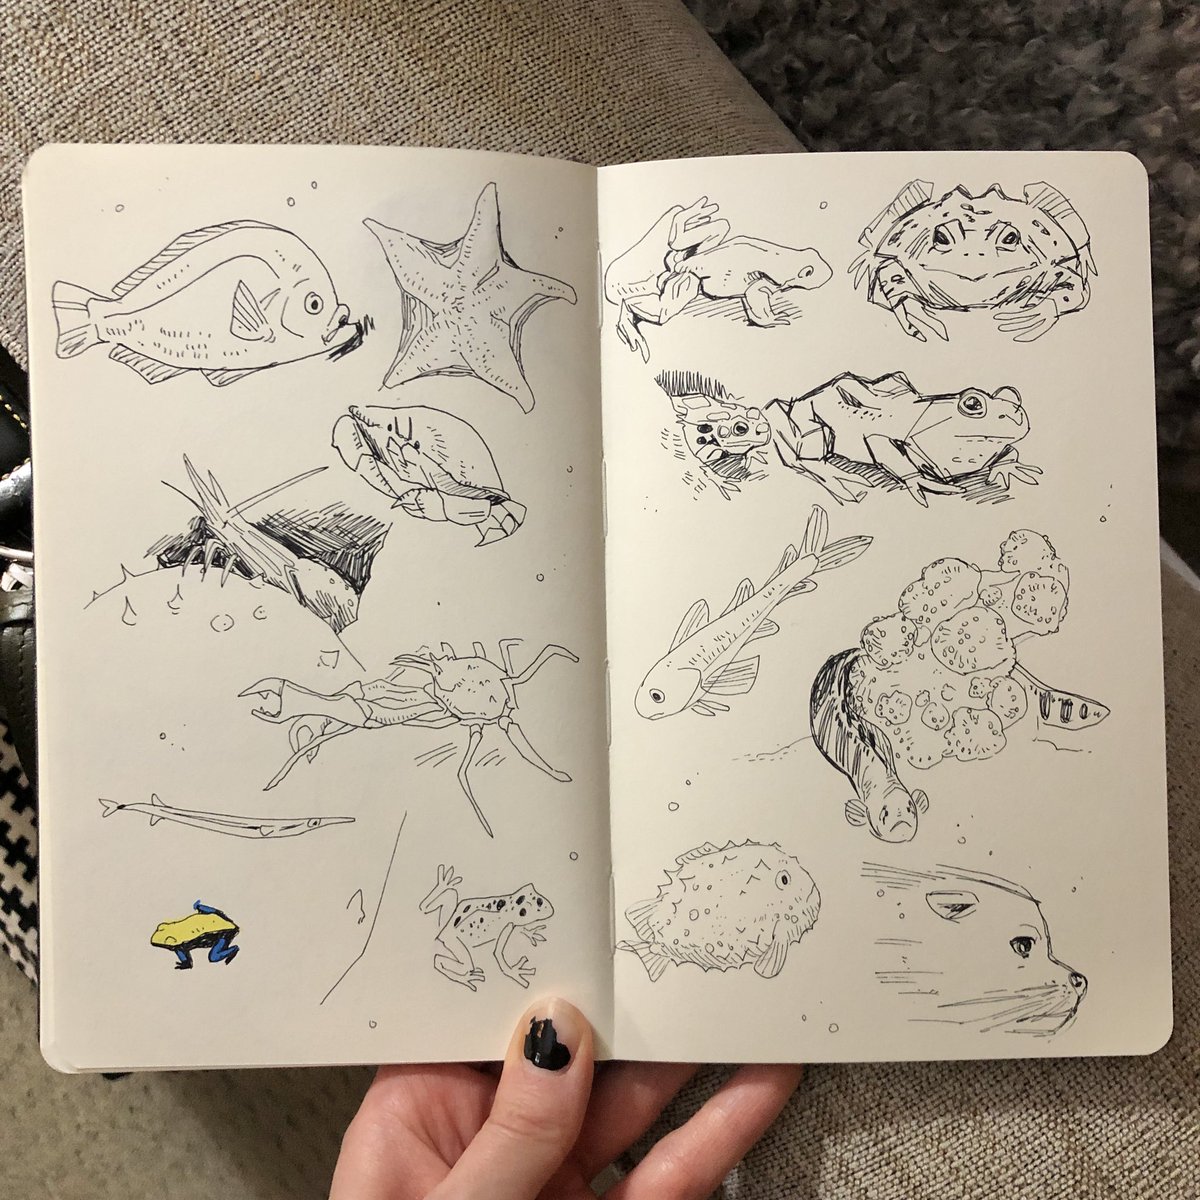 got to draw fish at the aquarium and a tiny little girl told me she loved my hairstyle, overall 10/10 day 